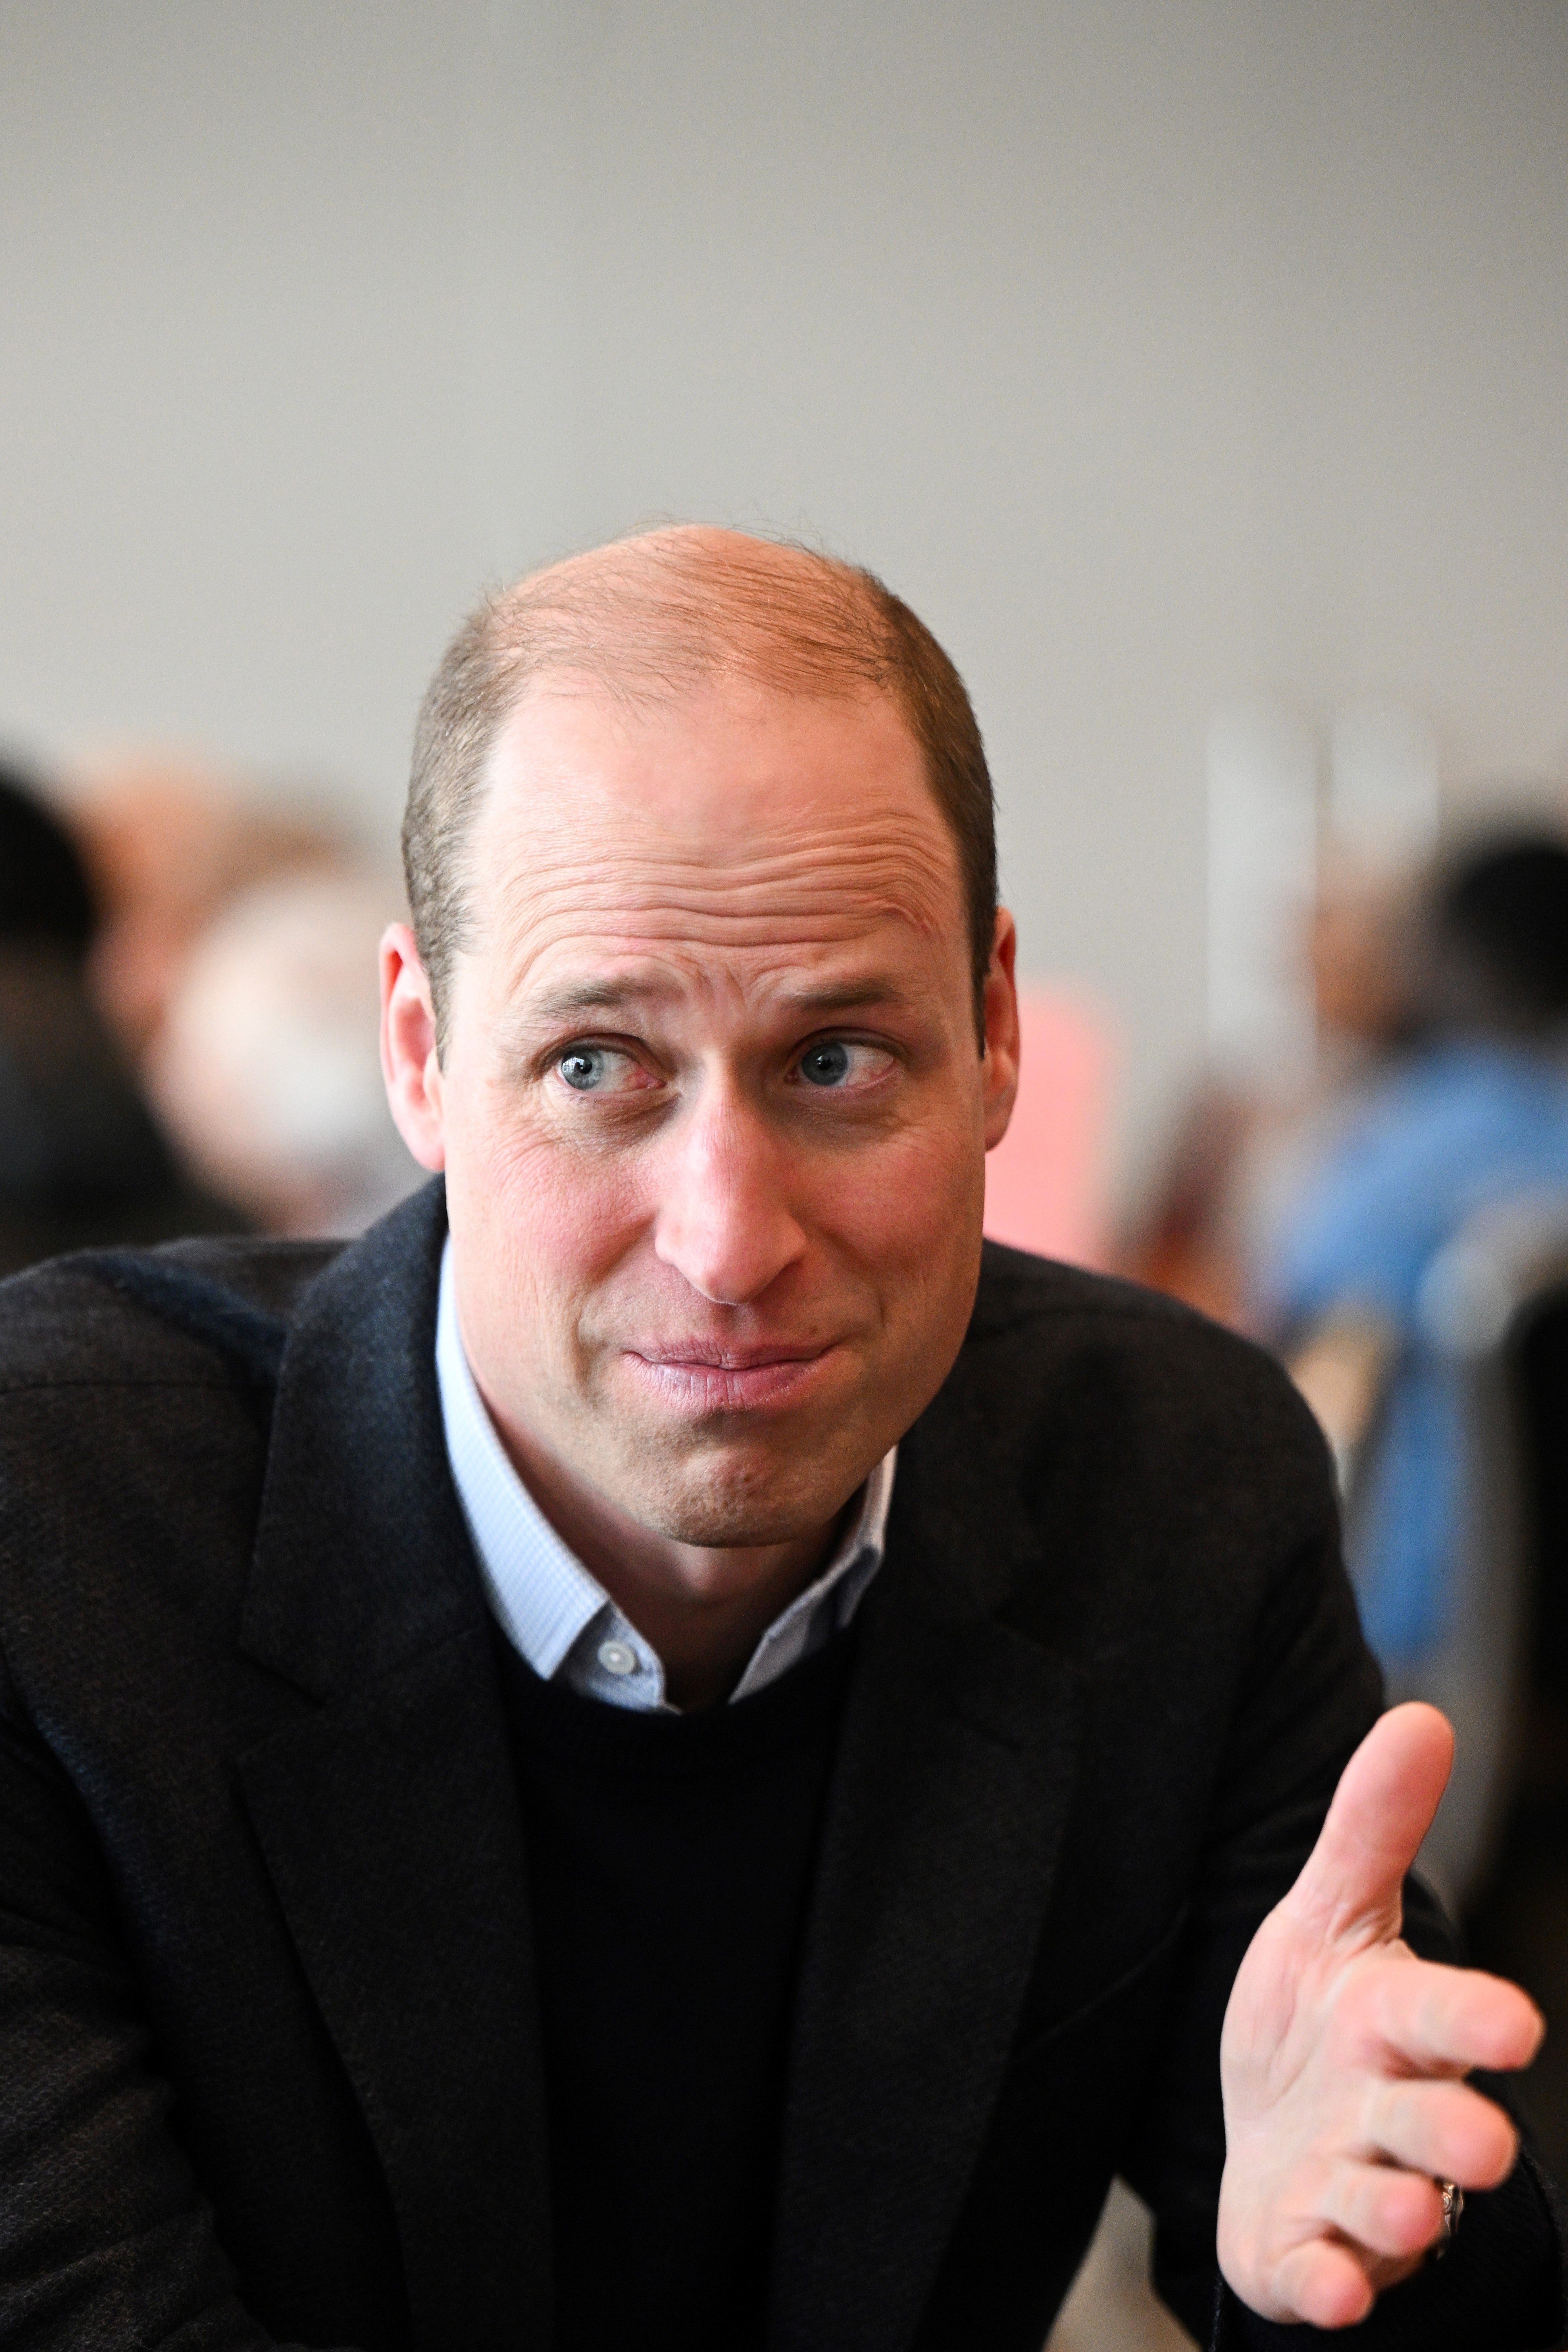 Prince William has been absent from public life as he supports his wife in her cancer battle